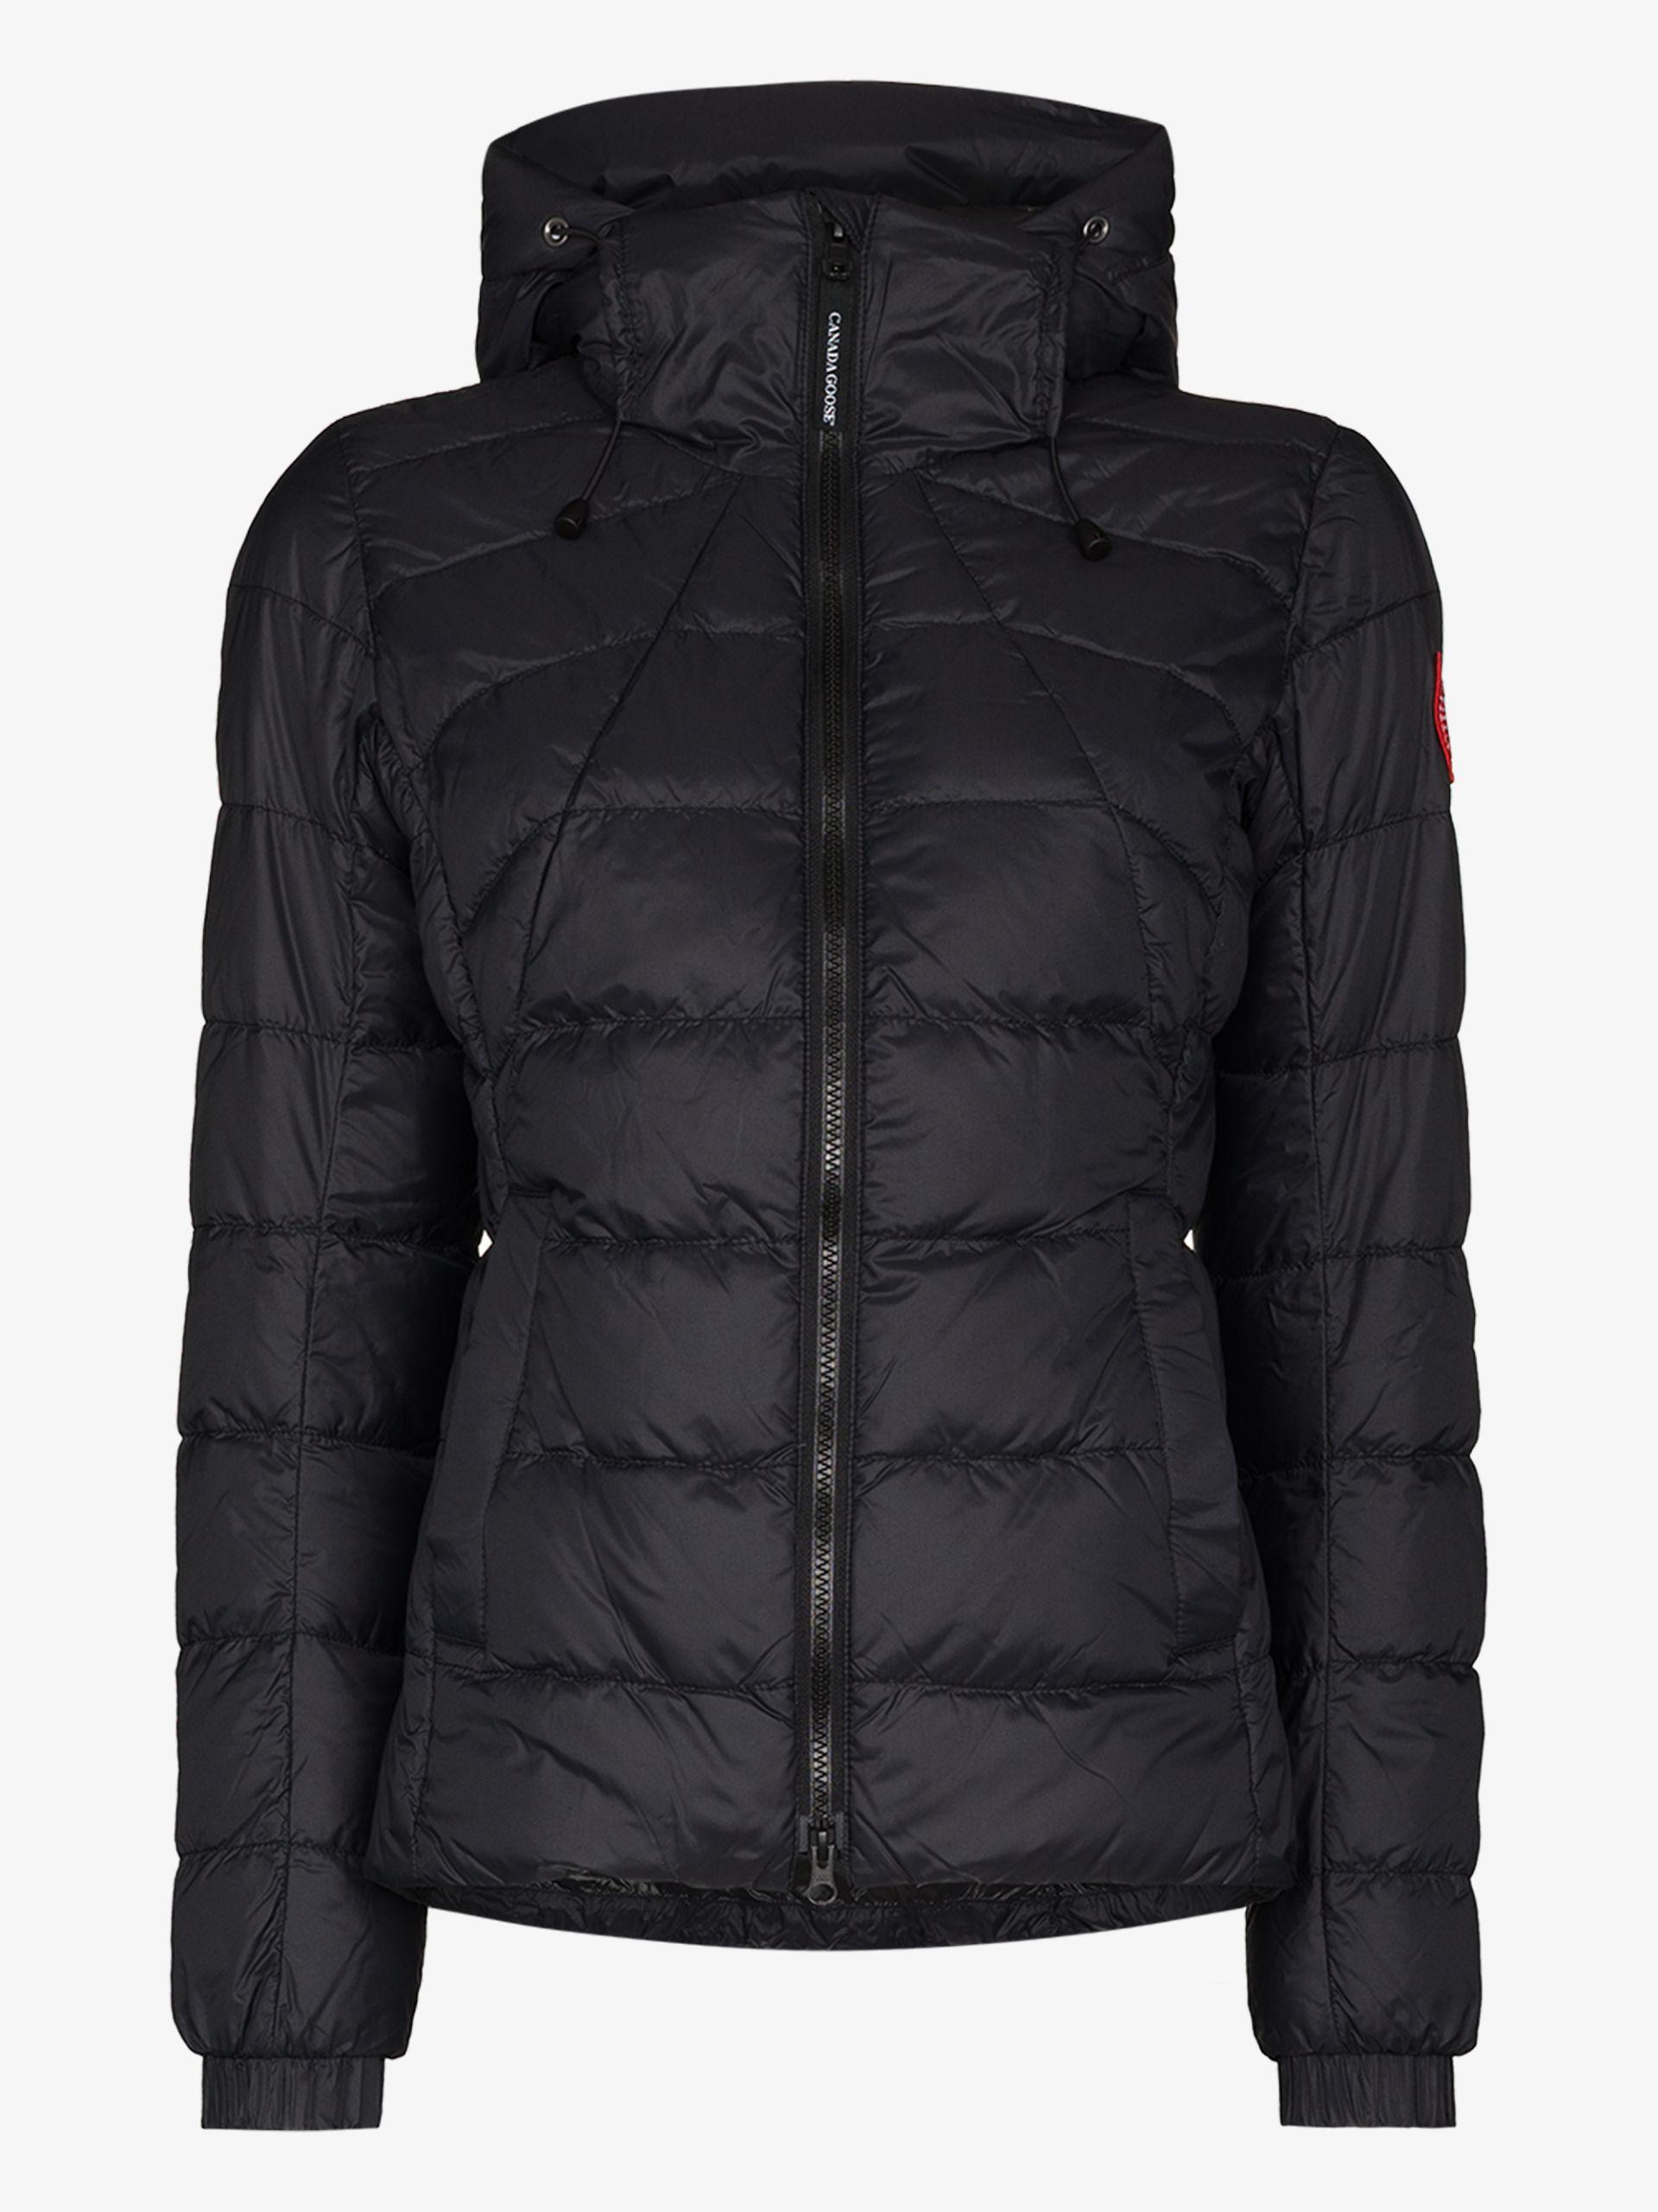 Canada Goose Goose Abbott Hoody Packable Down Jacket, Quilted 